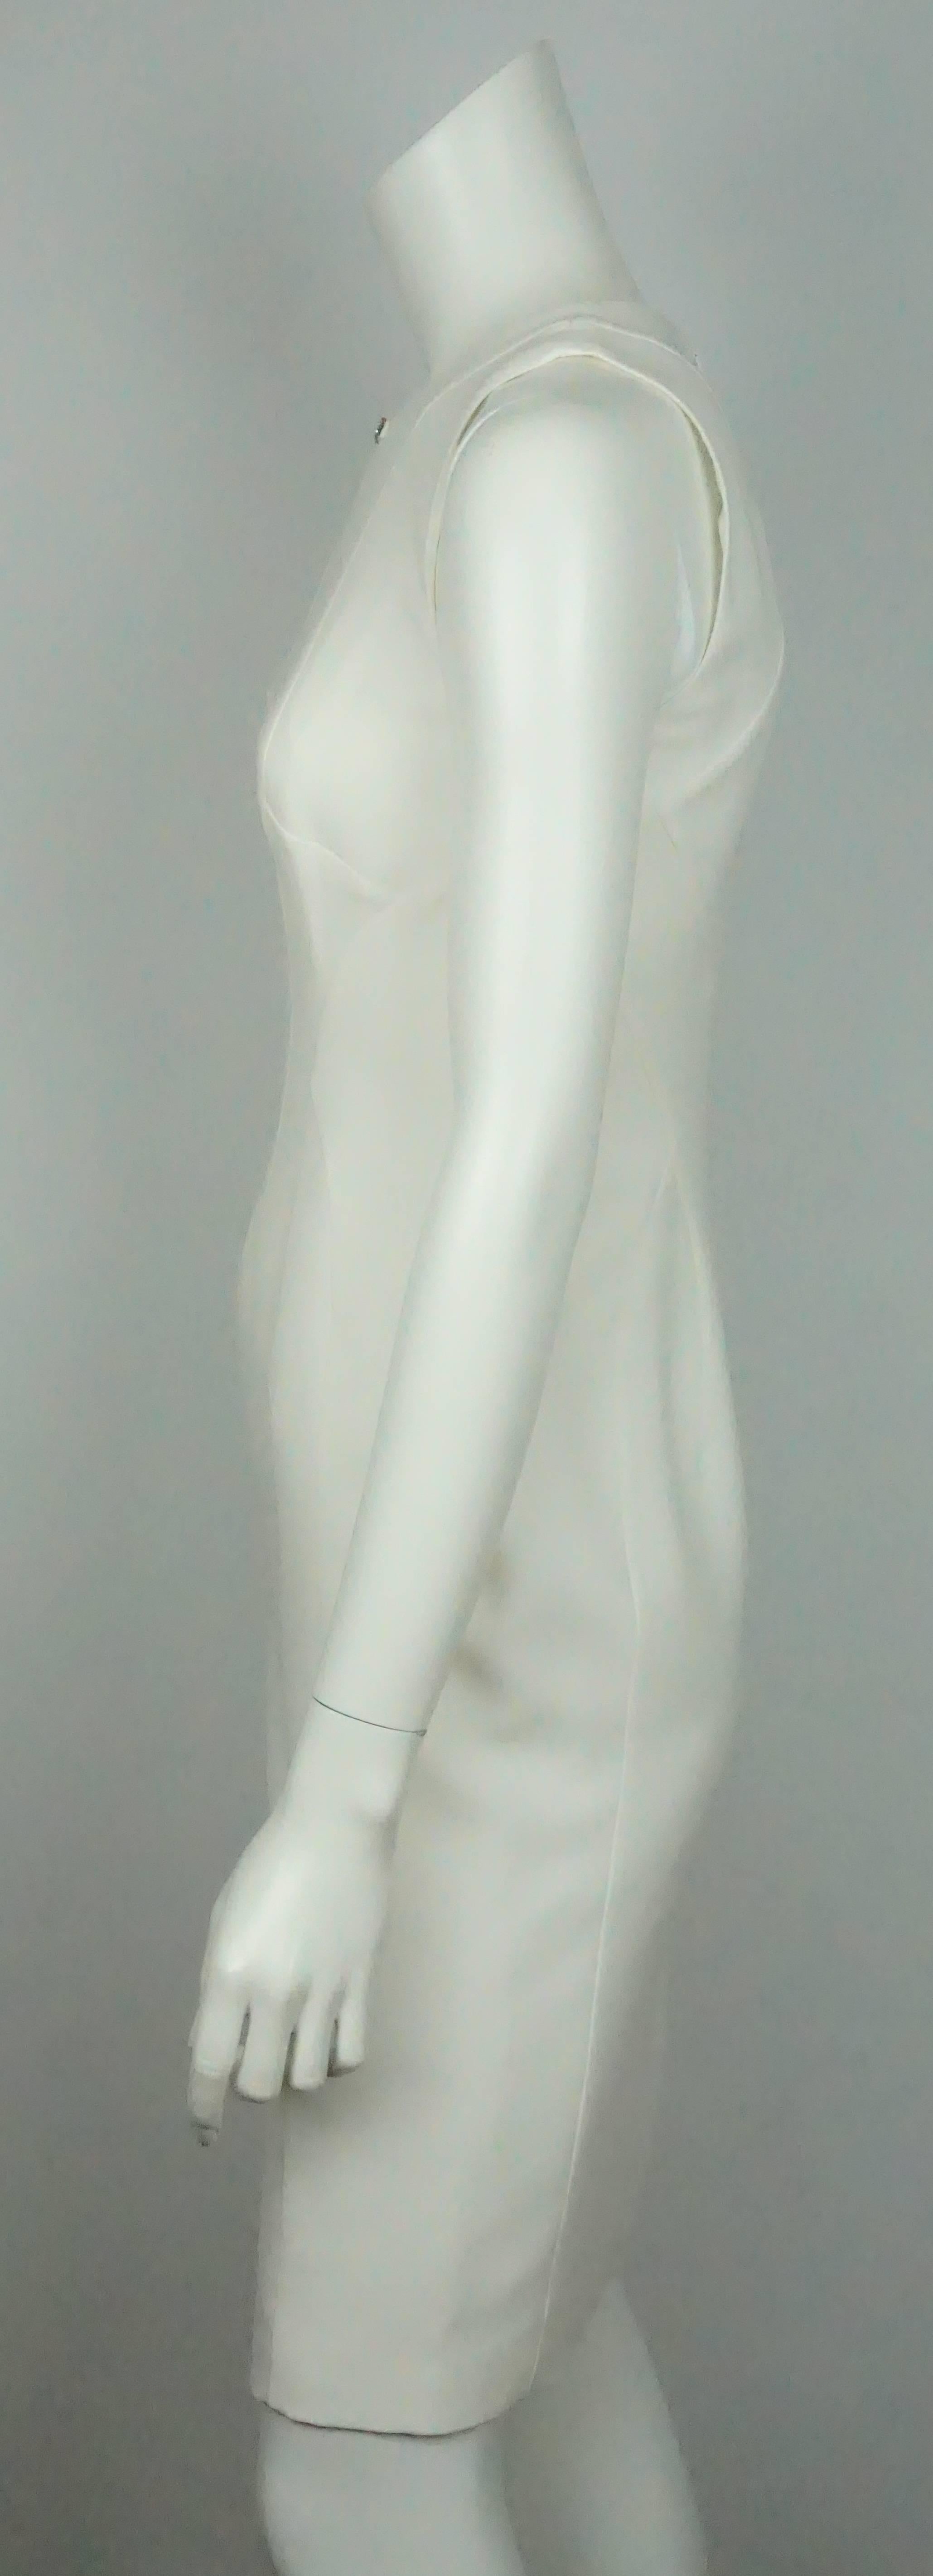 Versace Ivory Silk Sleeveless Dress - 38   This simple yet stunning silk dress is in excellent condition. The dress has deep v neckline that is connected by a rectangular jeweled detail. The dress is sleeveless and has a geometric look to it by the